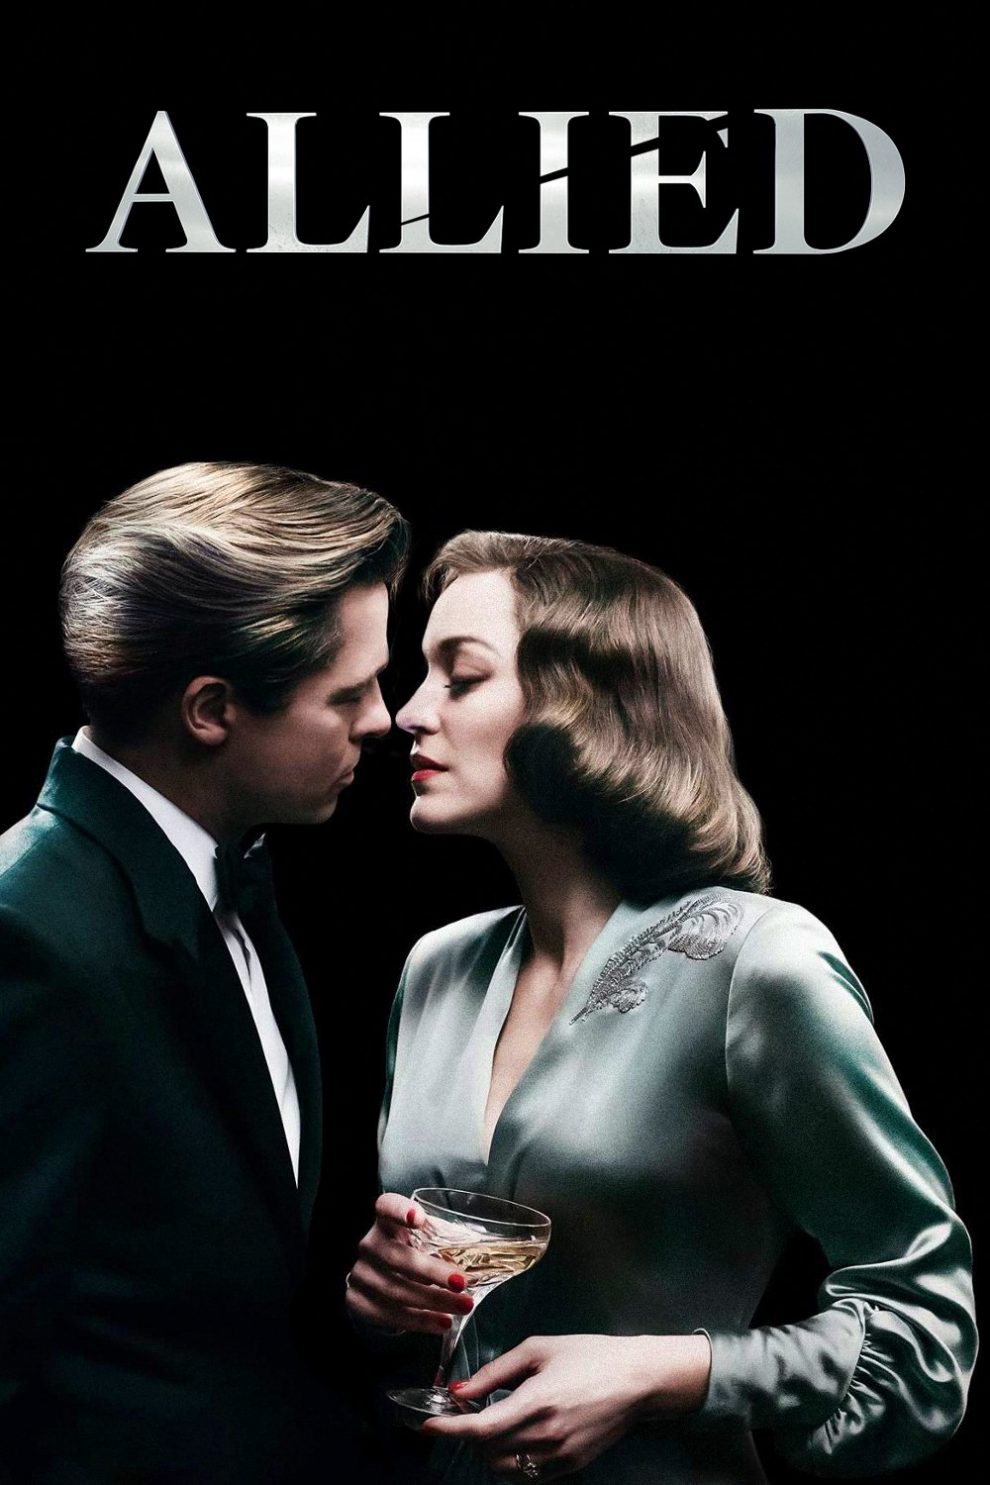 Poster for the movie "Allied"